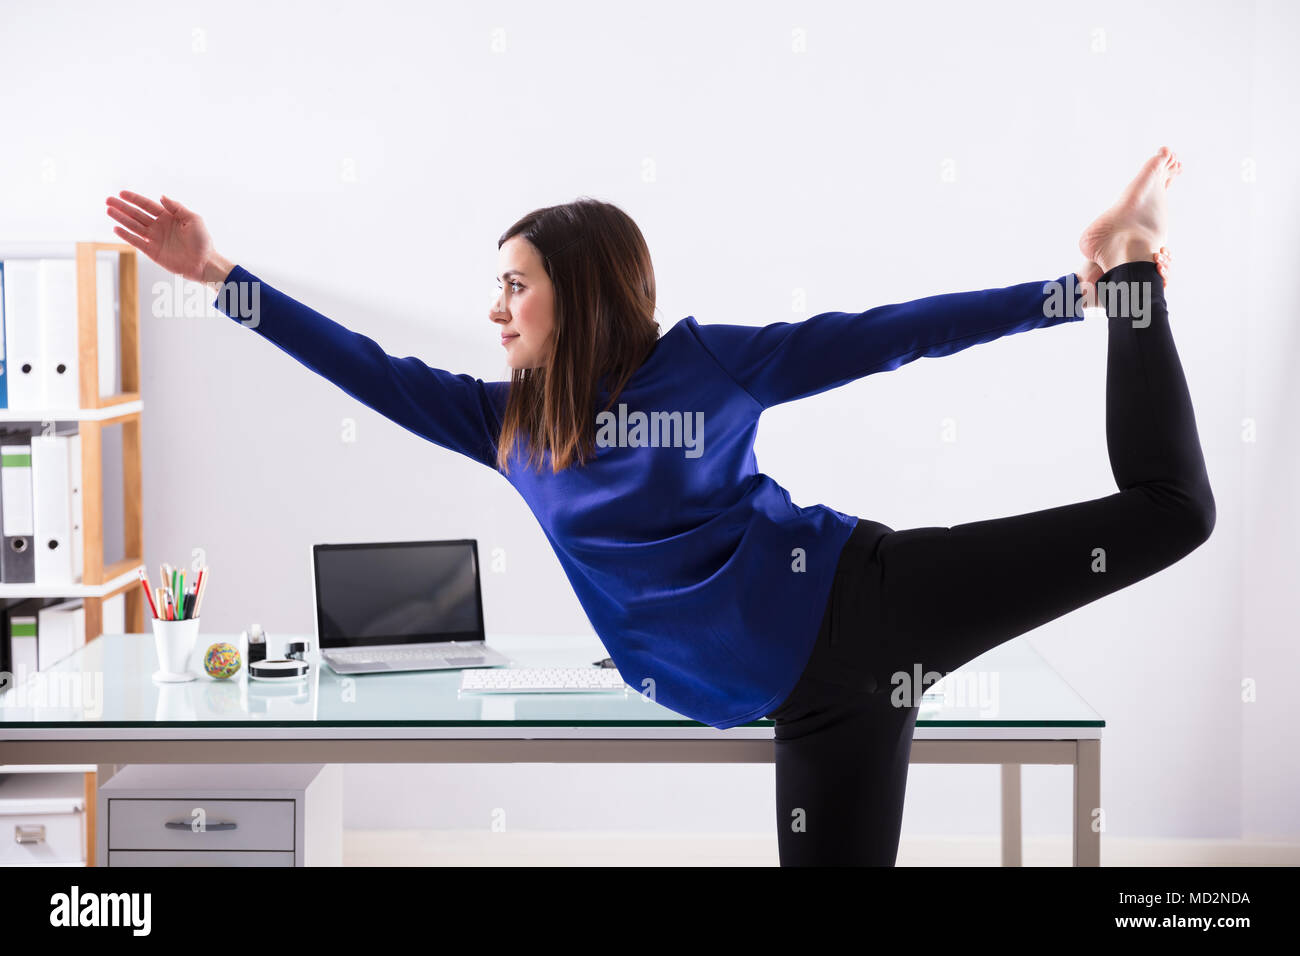 Young Businesswoman Looking At Invoice On Computer Doing Yoga Stock Photo